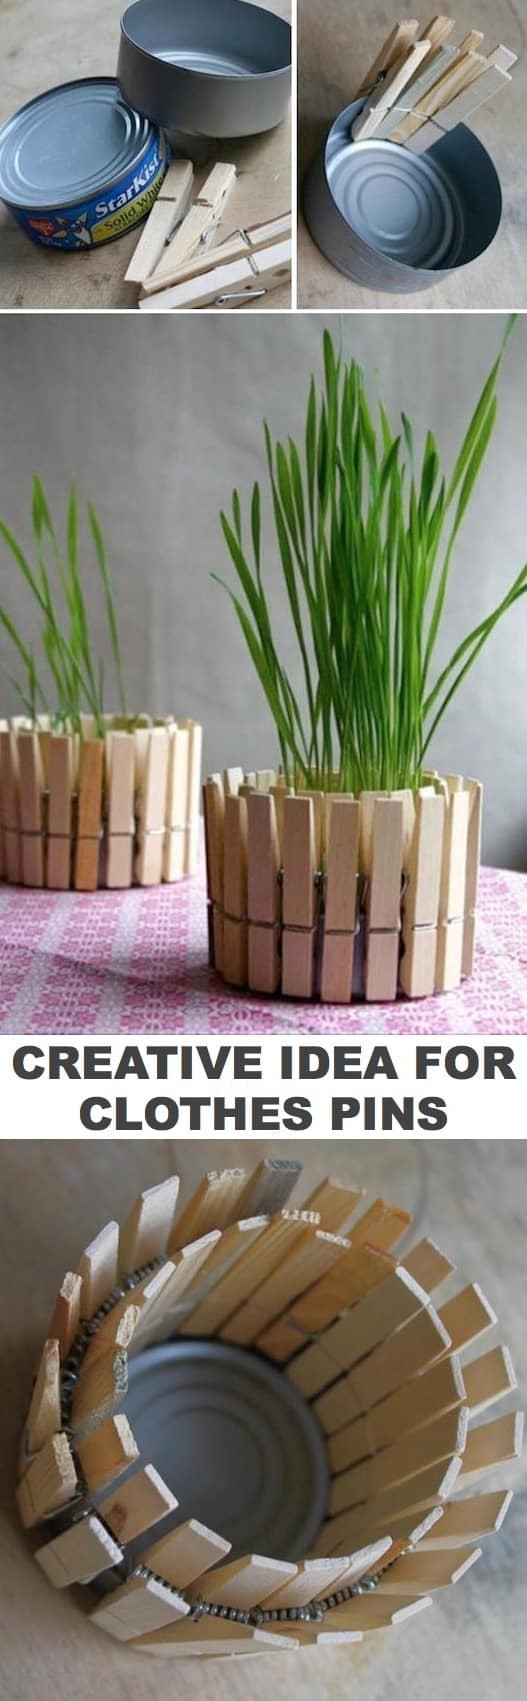 Cheap Craft Ideas For Adults
 30 Easy Craft Ideas That Will Spark Your Creativity DIY